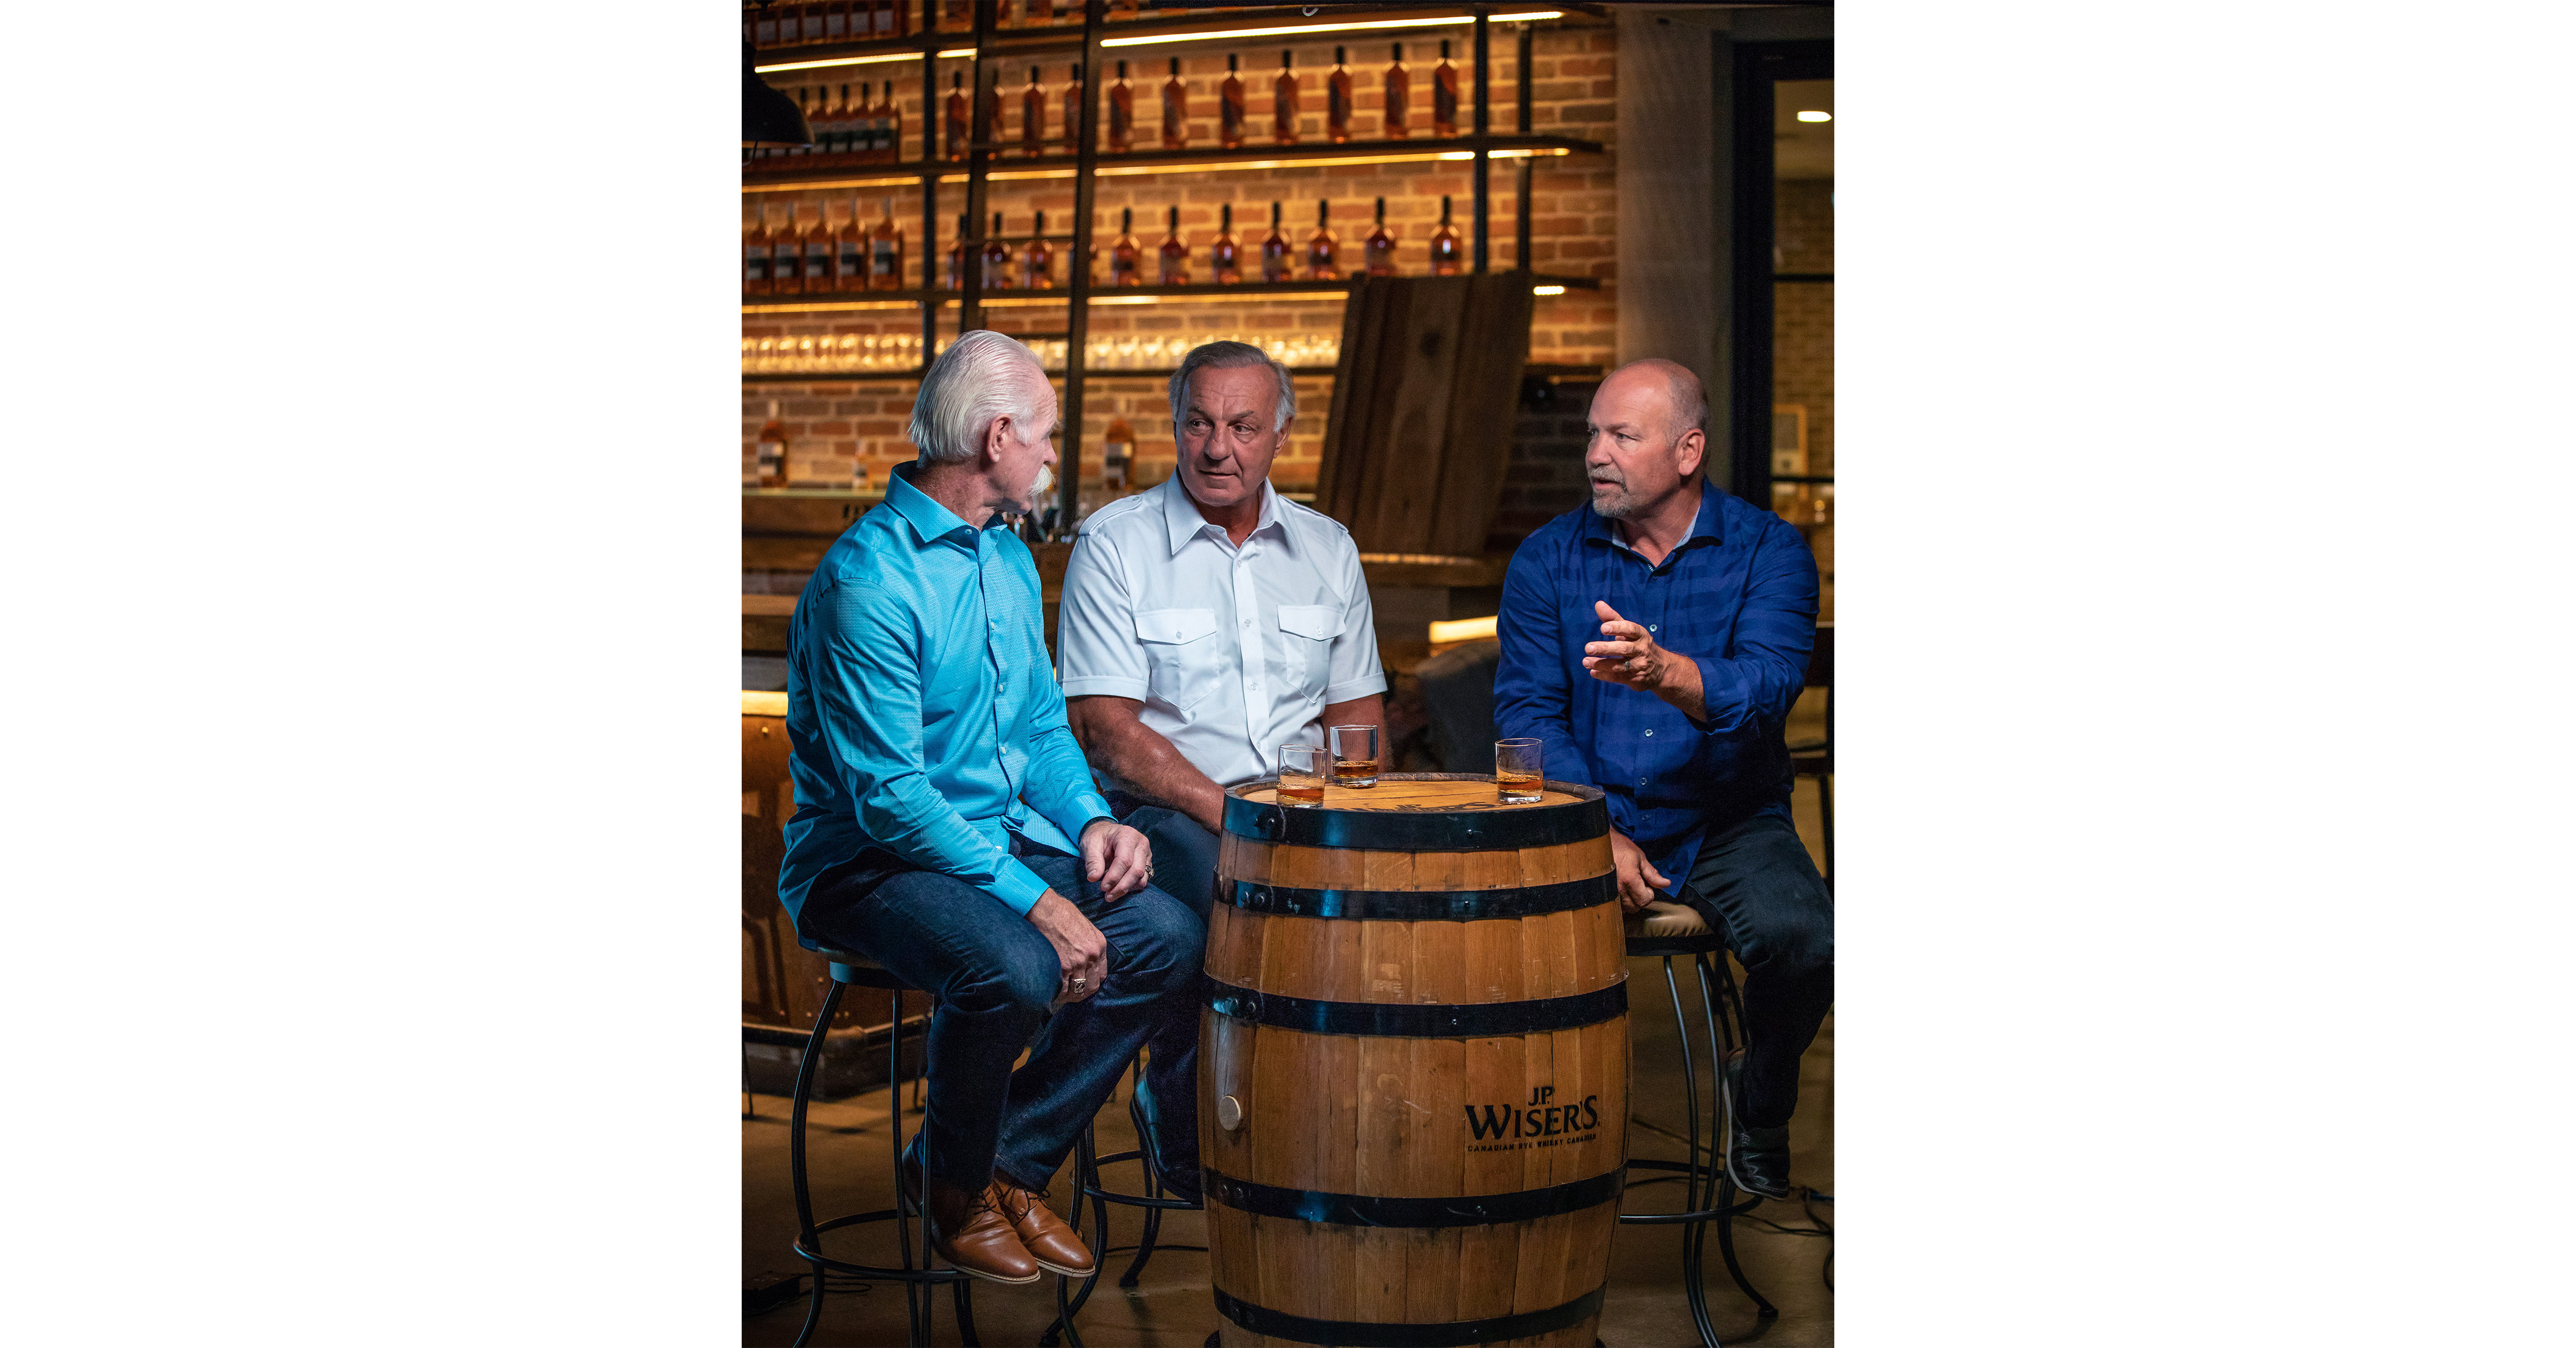 J.P. Wiser's Becomes the Official Canadian Whisky of the Detroit Red Wings